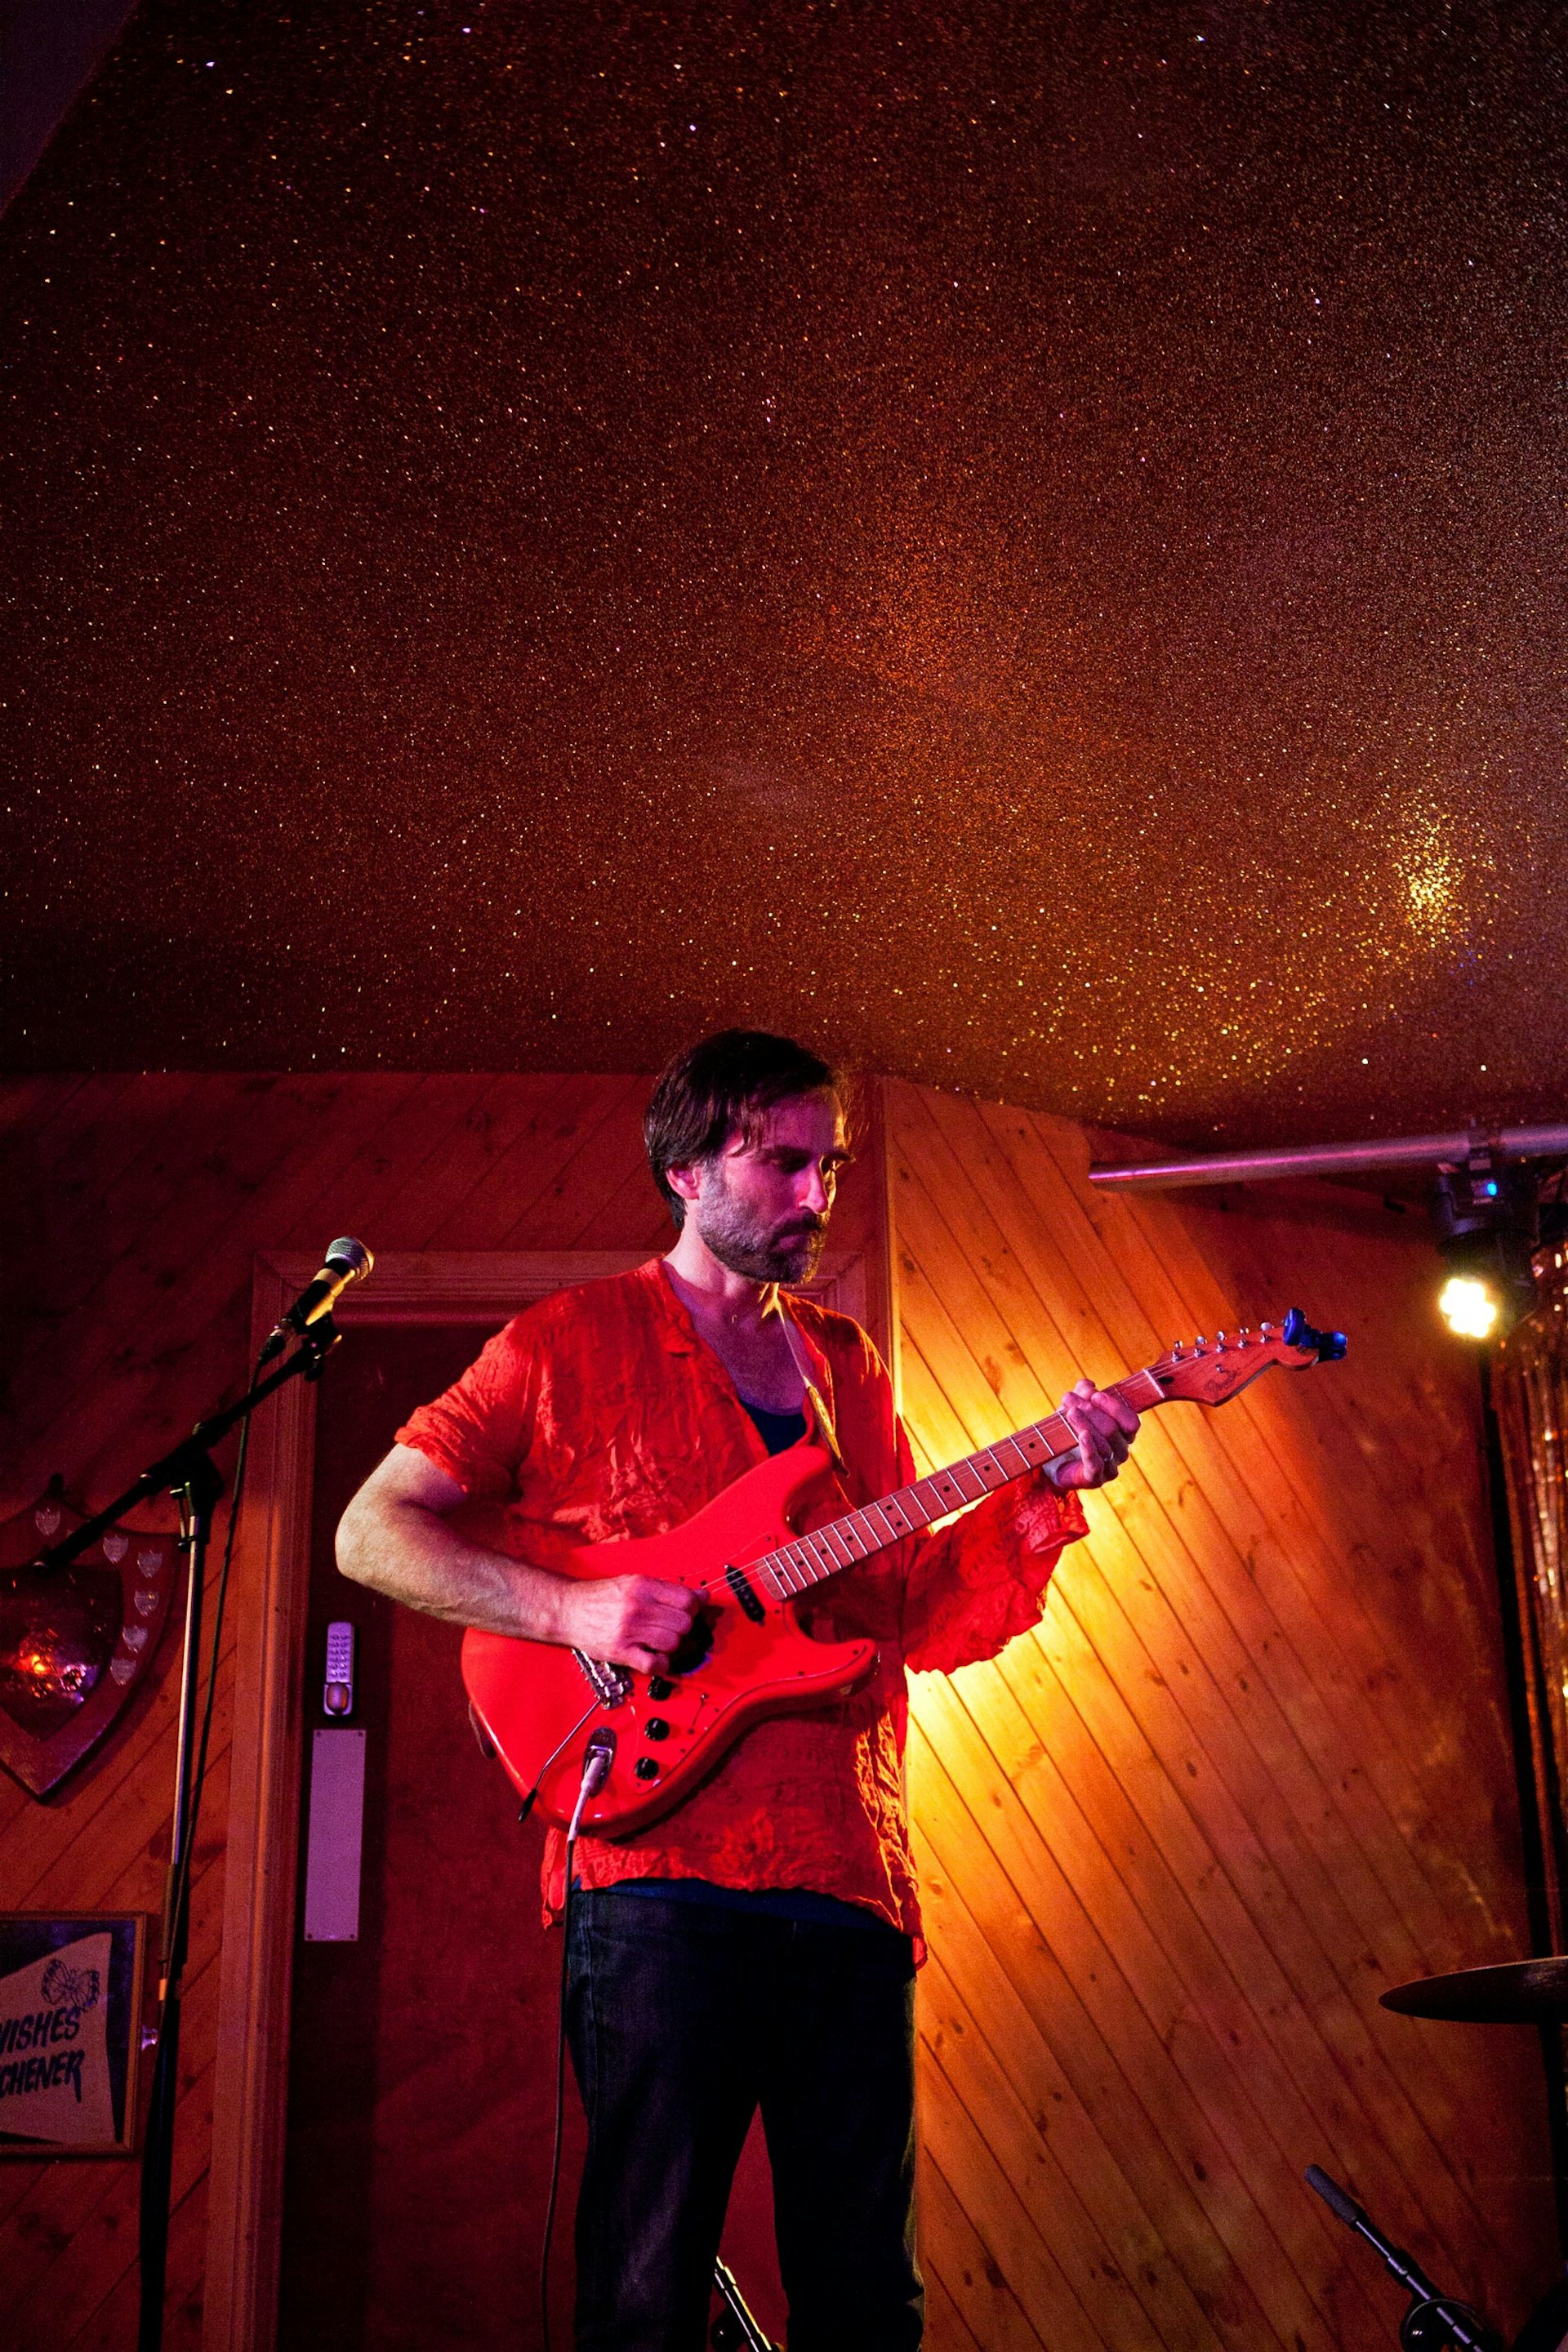 Neil Michael Hagerty performing with the Howling Hex at London's Moth Club, 2016. Photo by Declan Slattery.